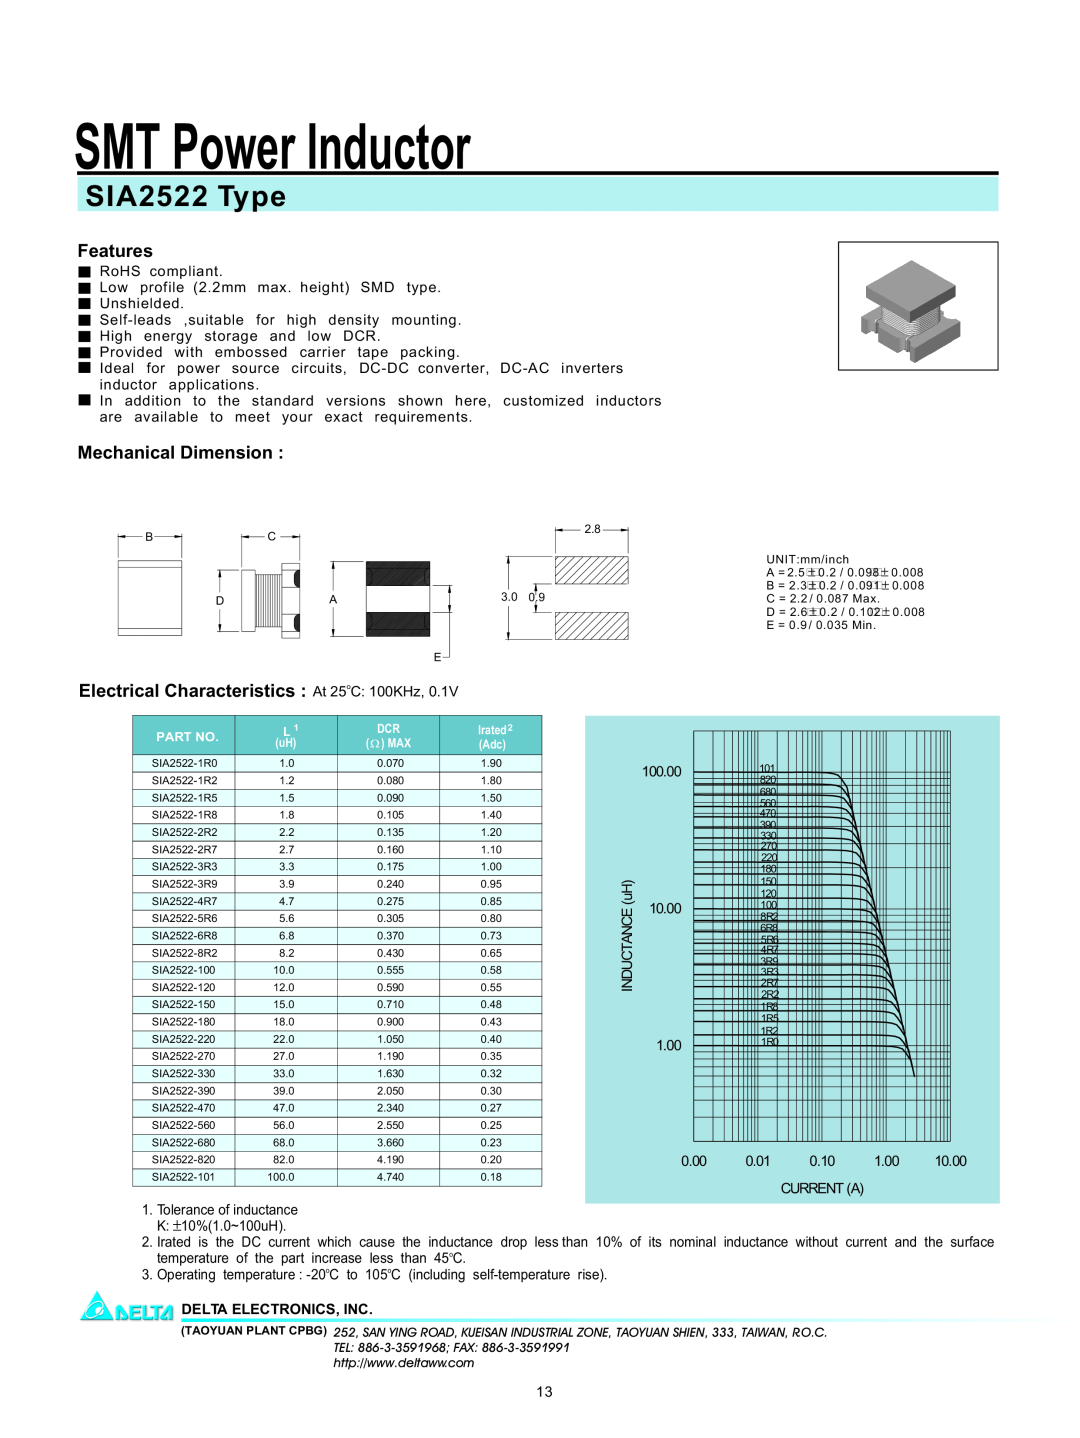 Delta Electronics manual SMT Power Inductor, SIA2522 Type, Features, Mechanical Dimension, Delta Electronics, Inc 